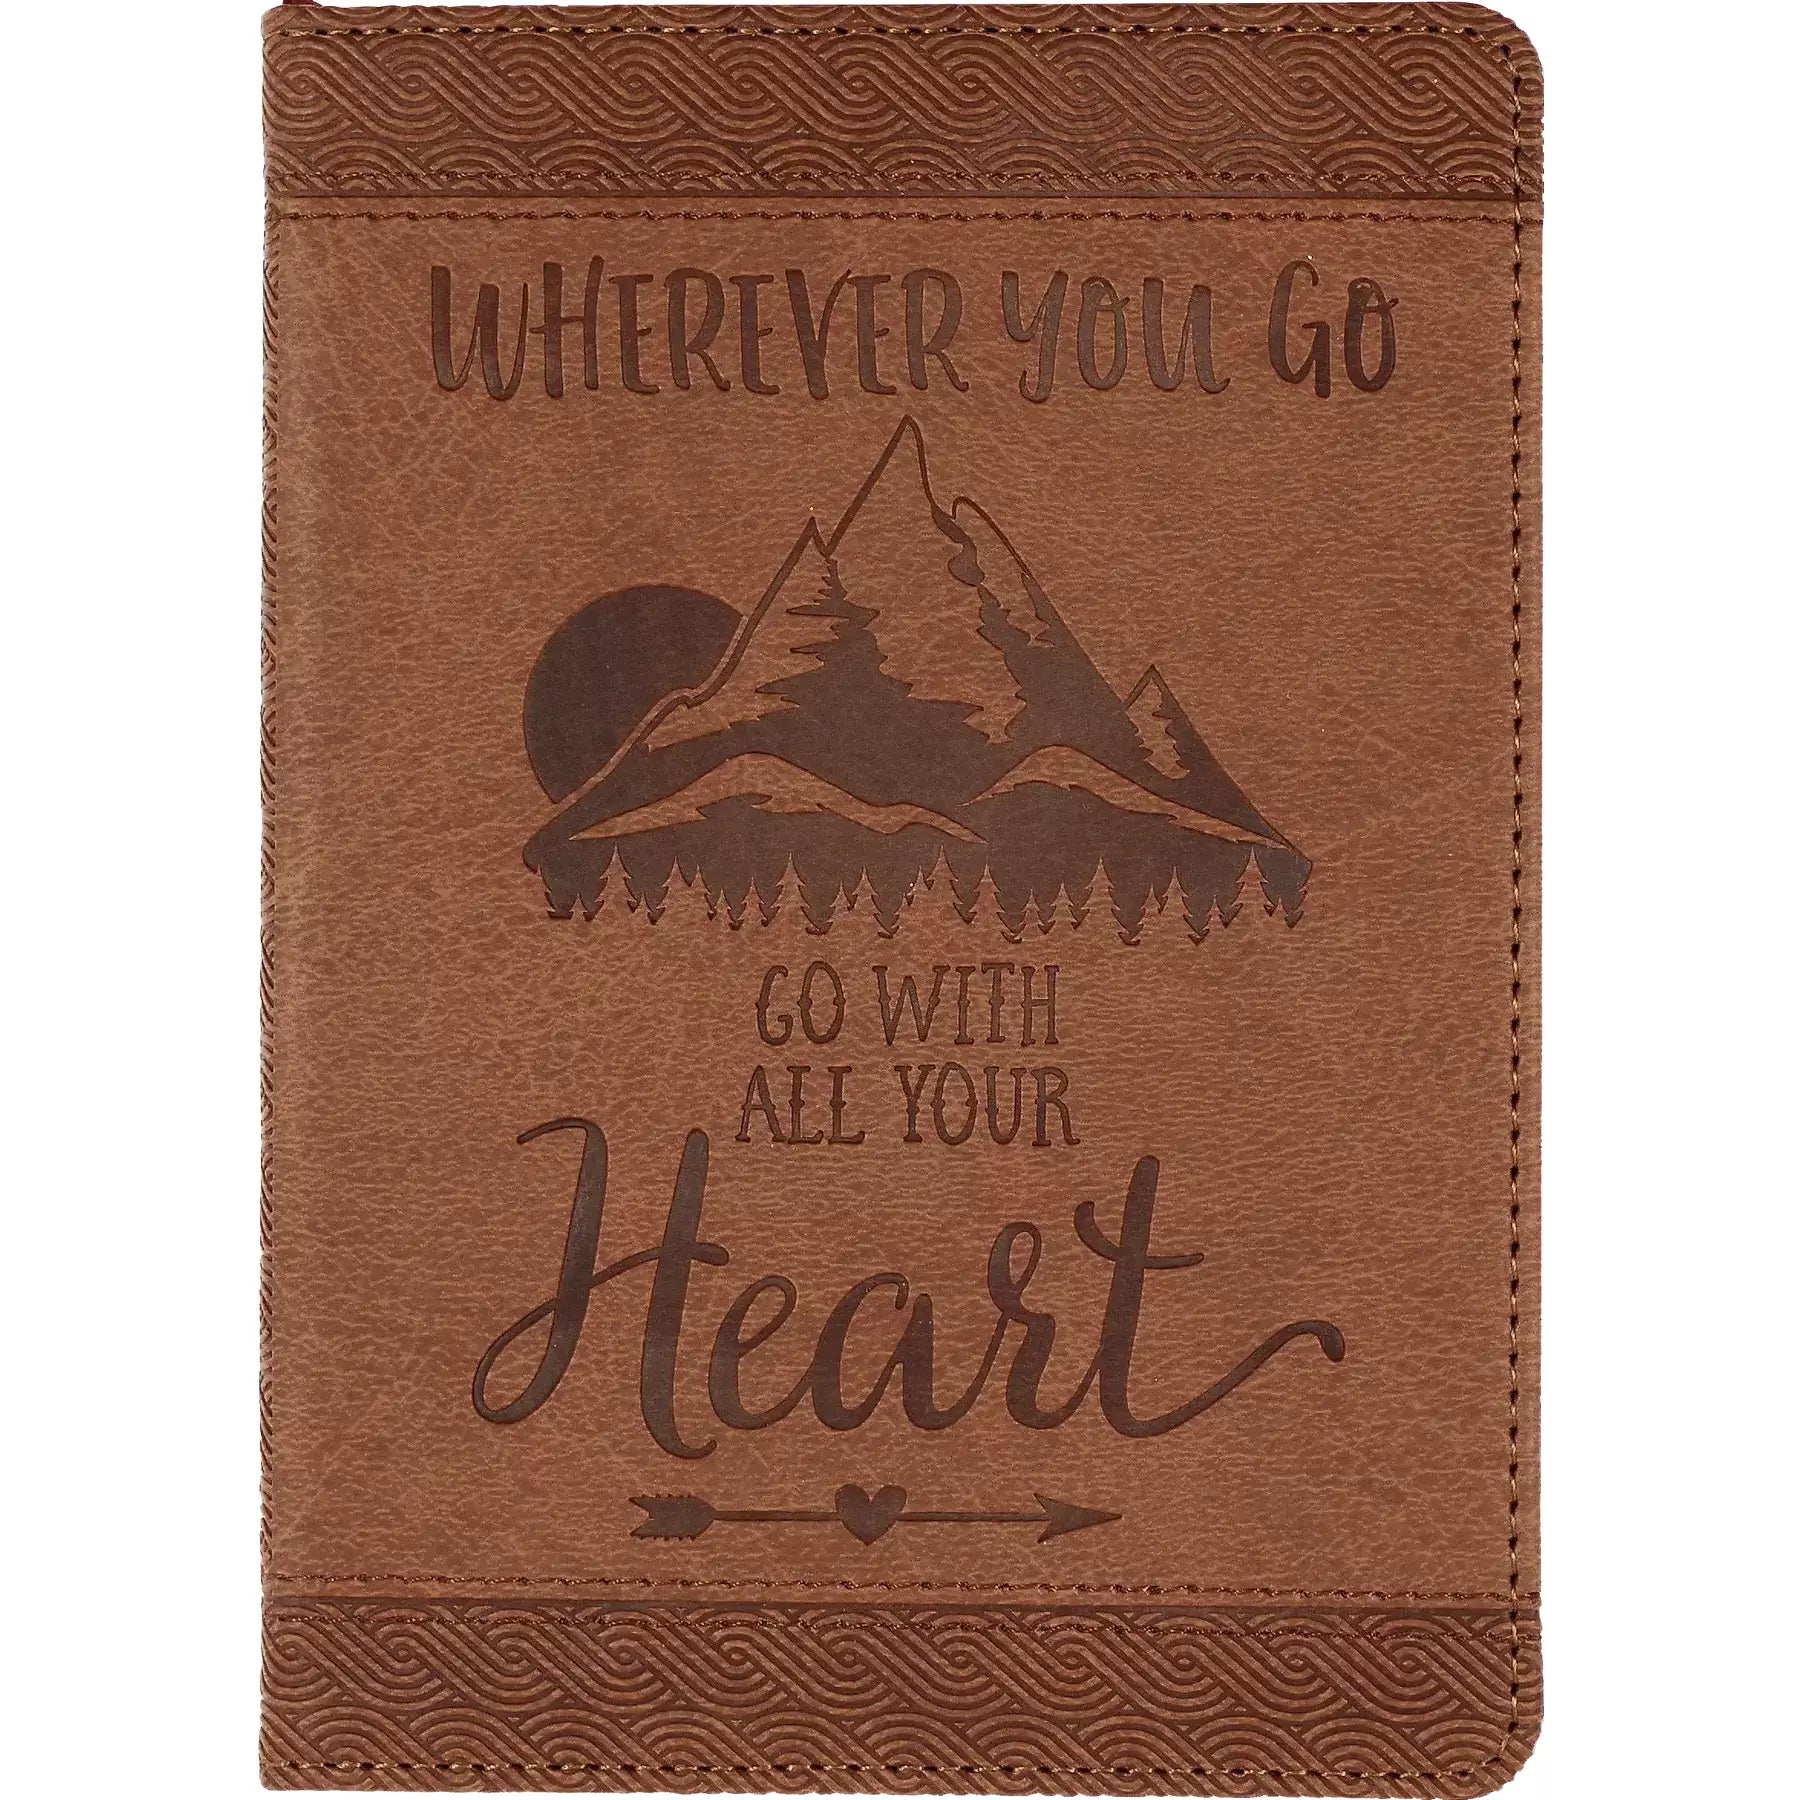 Wherever You Go, Go With All Your Heart Artisan Journal - Zinnias Gift Boutique